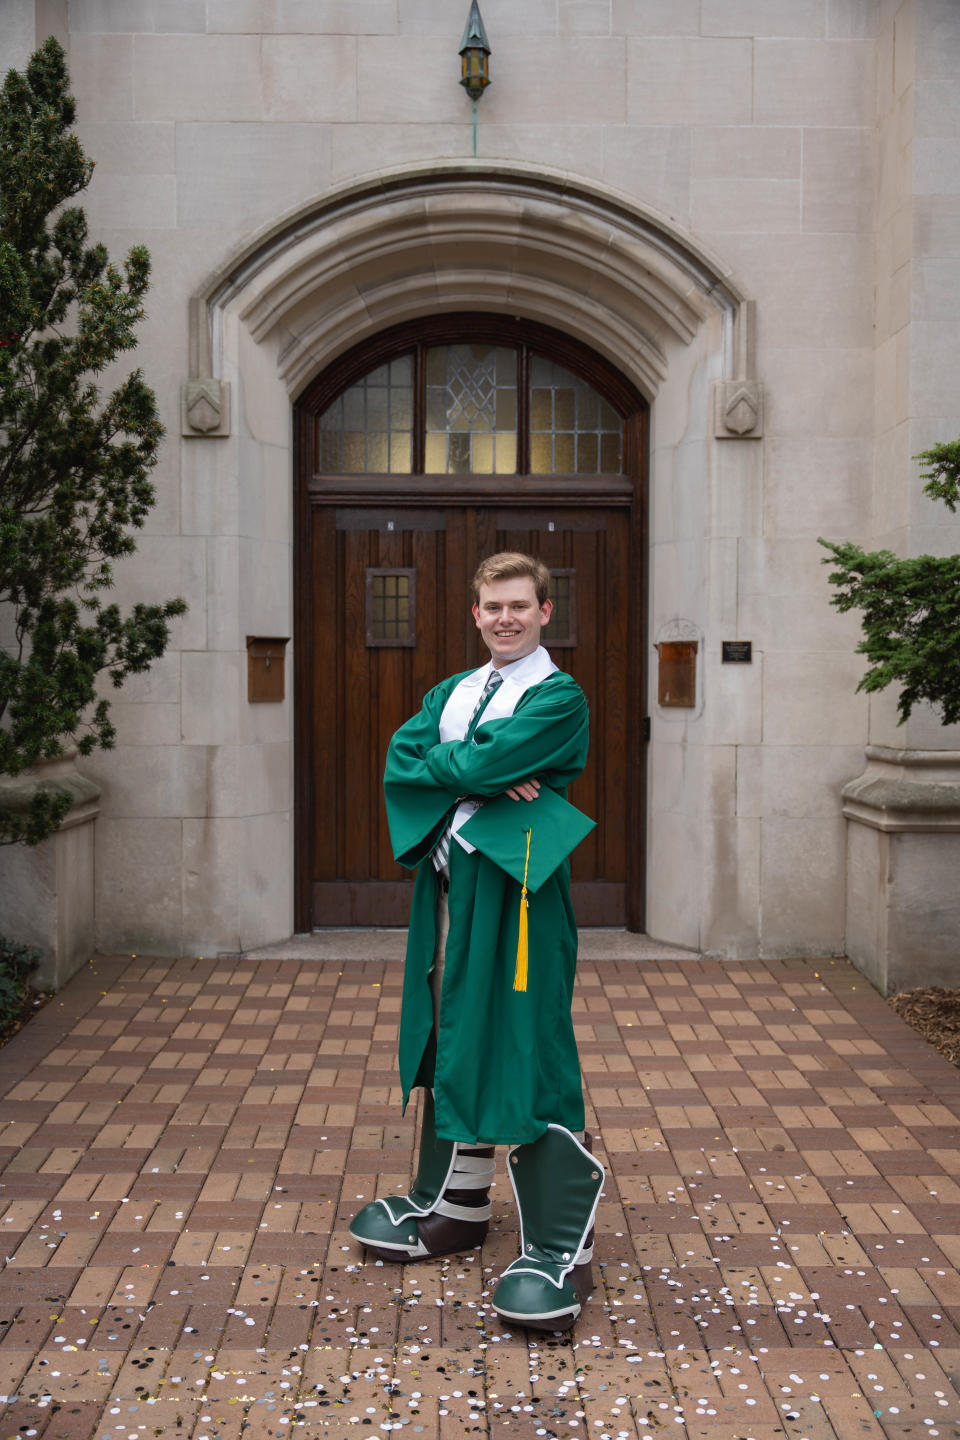 Caeden Hunter, who graduated from Michigan State University in the spring, portrayed Sparty for four years.